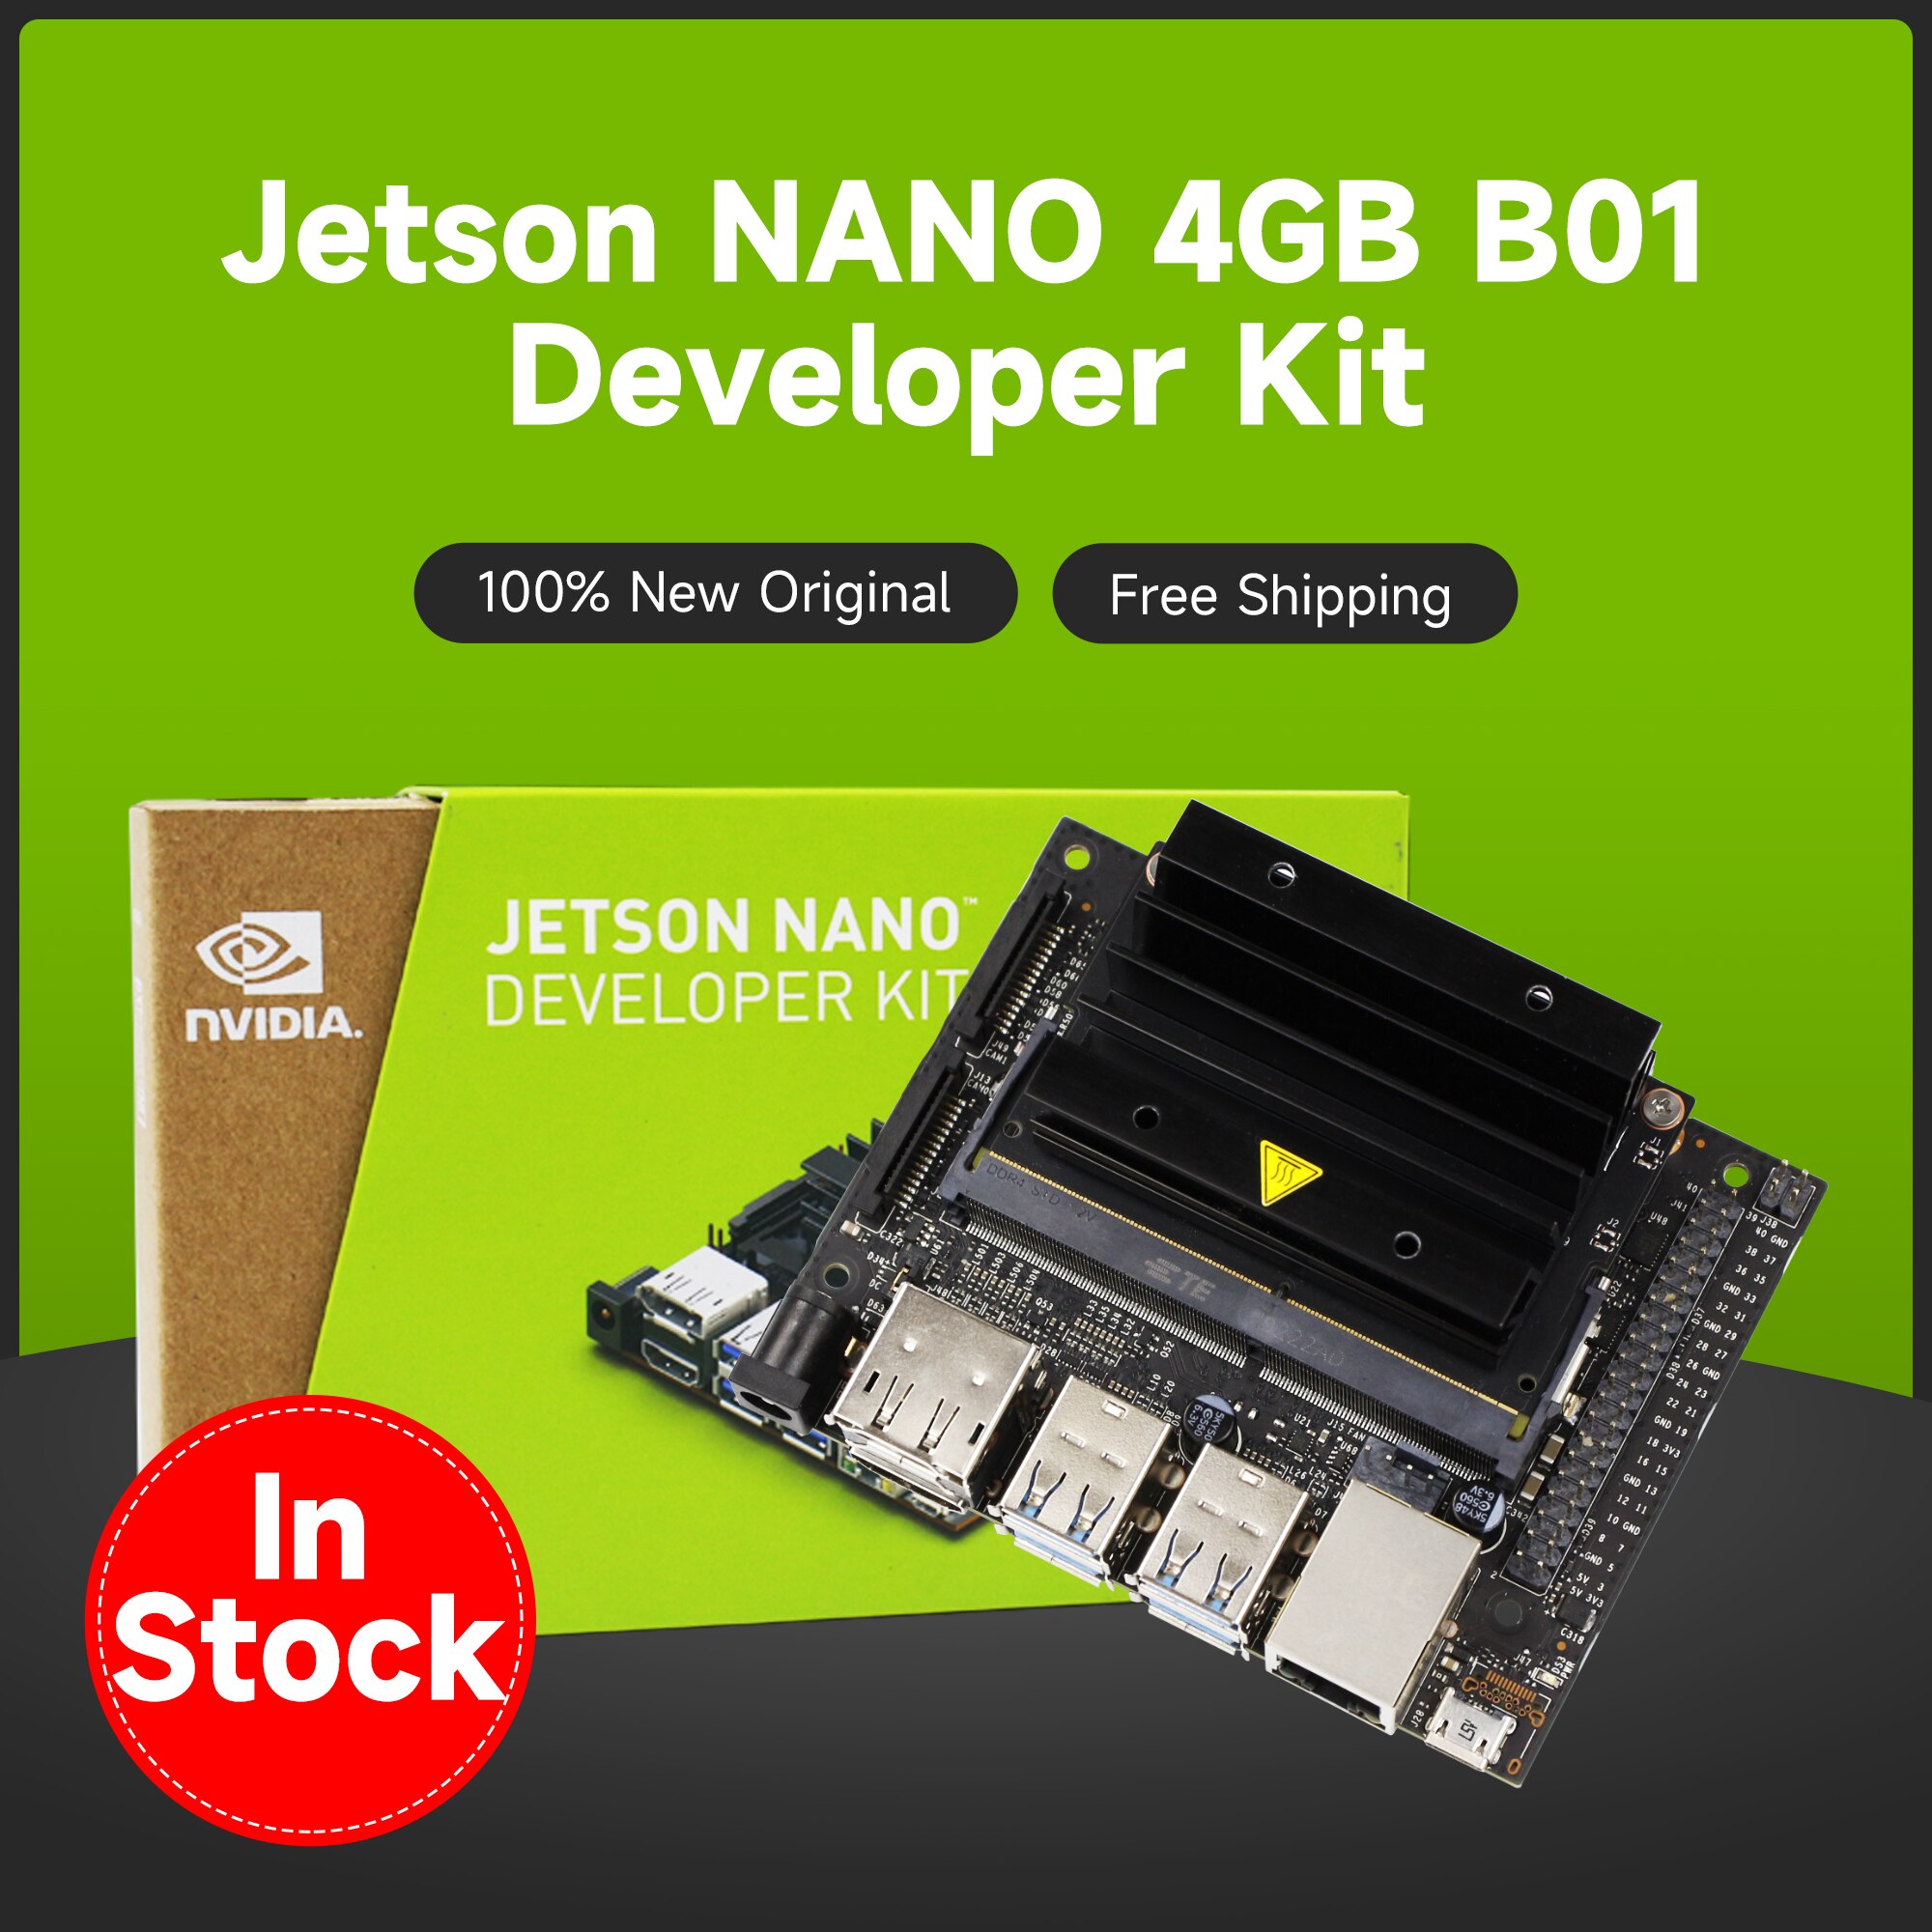 In-stock Jetson Nano Developer Kit 4GB B01 with TF Card Slot for AI Deep Learning Development